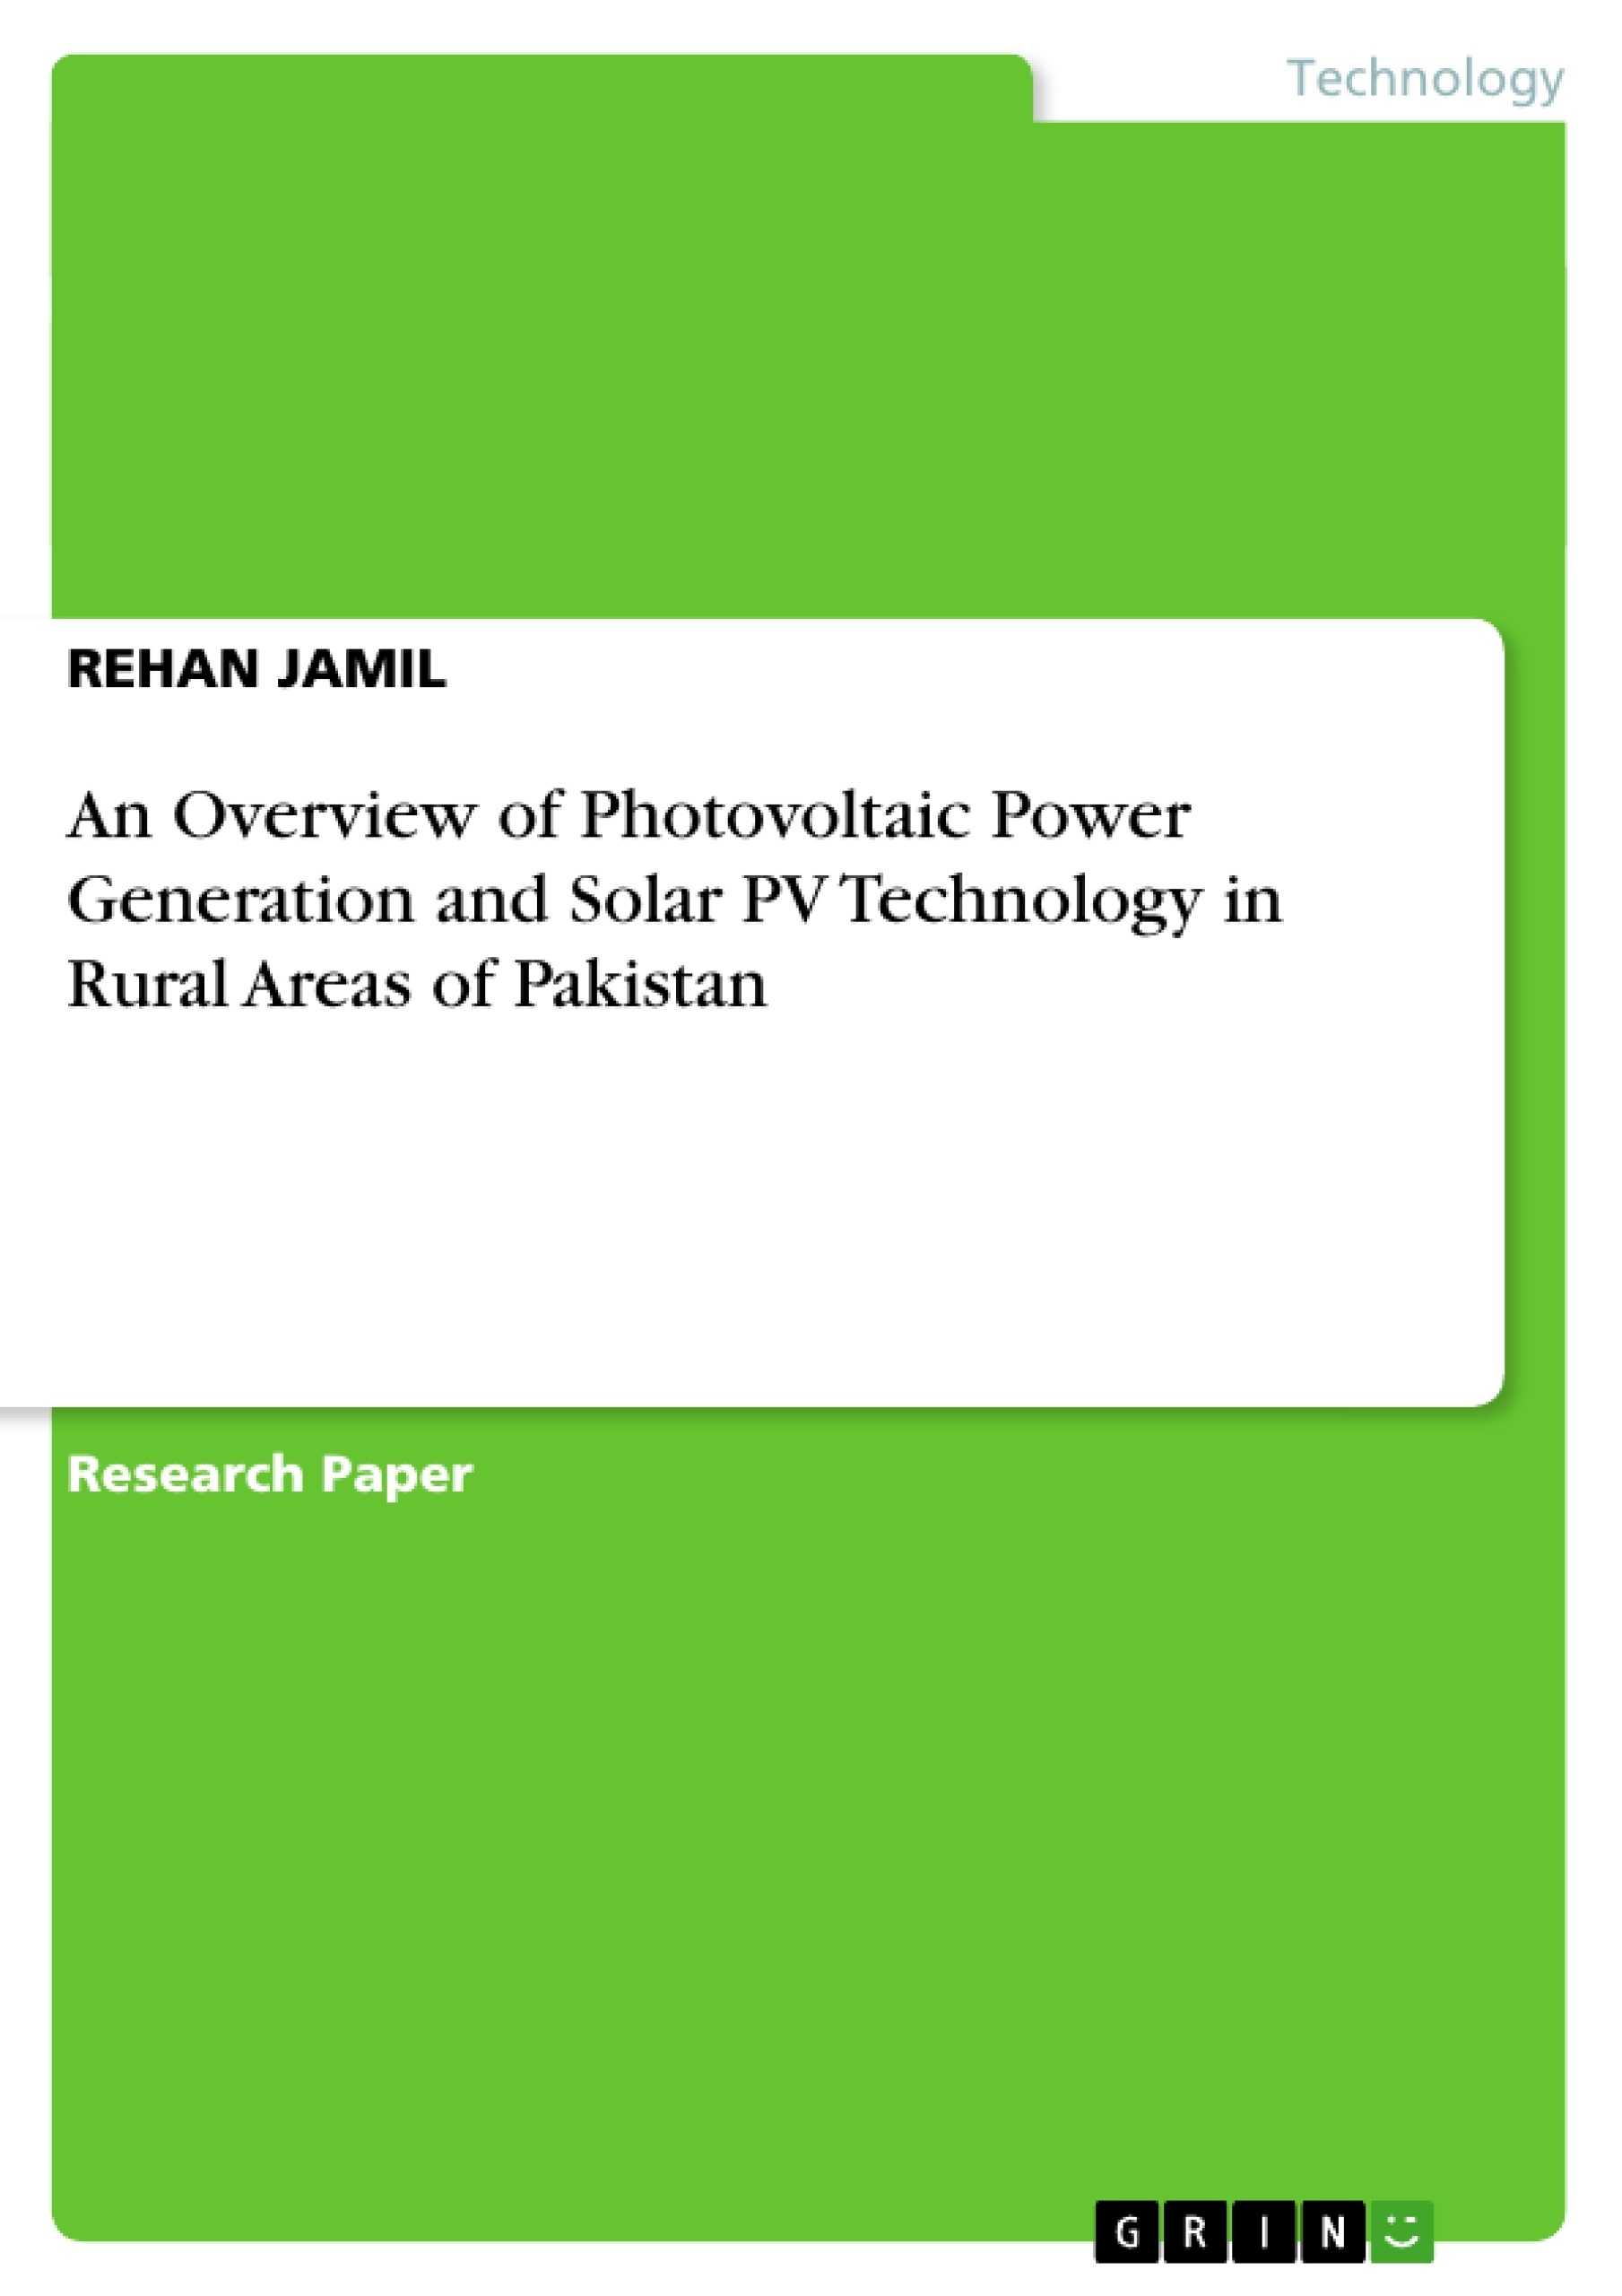 Title: An Overview of Photovoltaic Power Generation and Solar PV Technology in Rural Areas of Pakistan